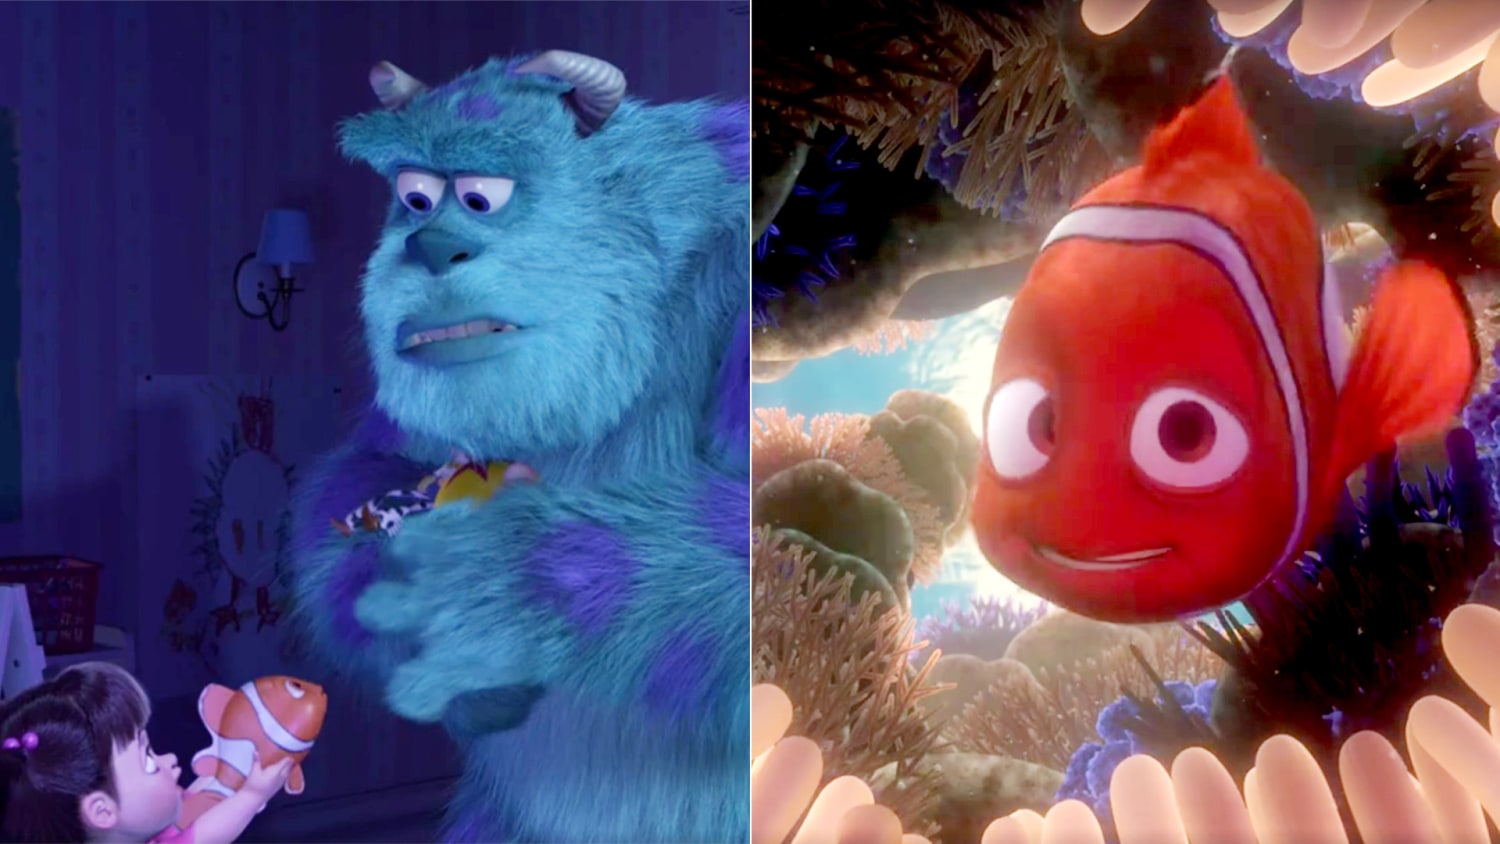 The Pixar Theory - Every Pixar Movie Is Connected